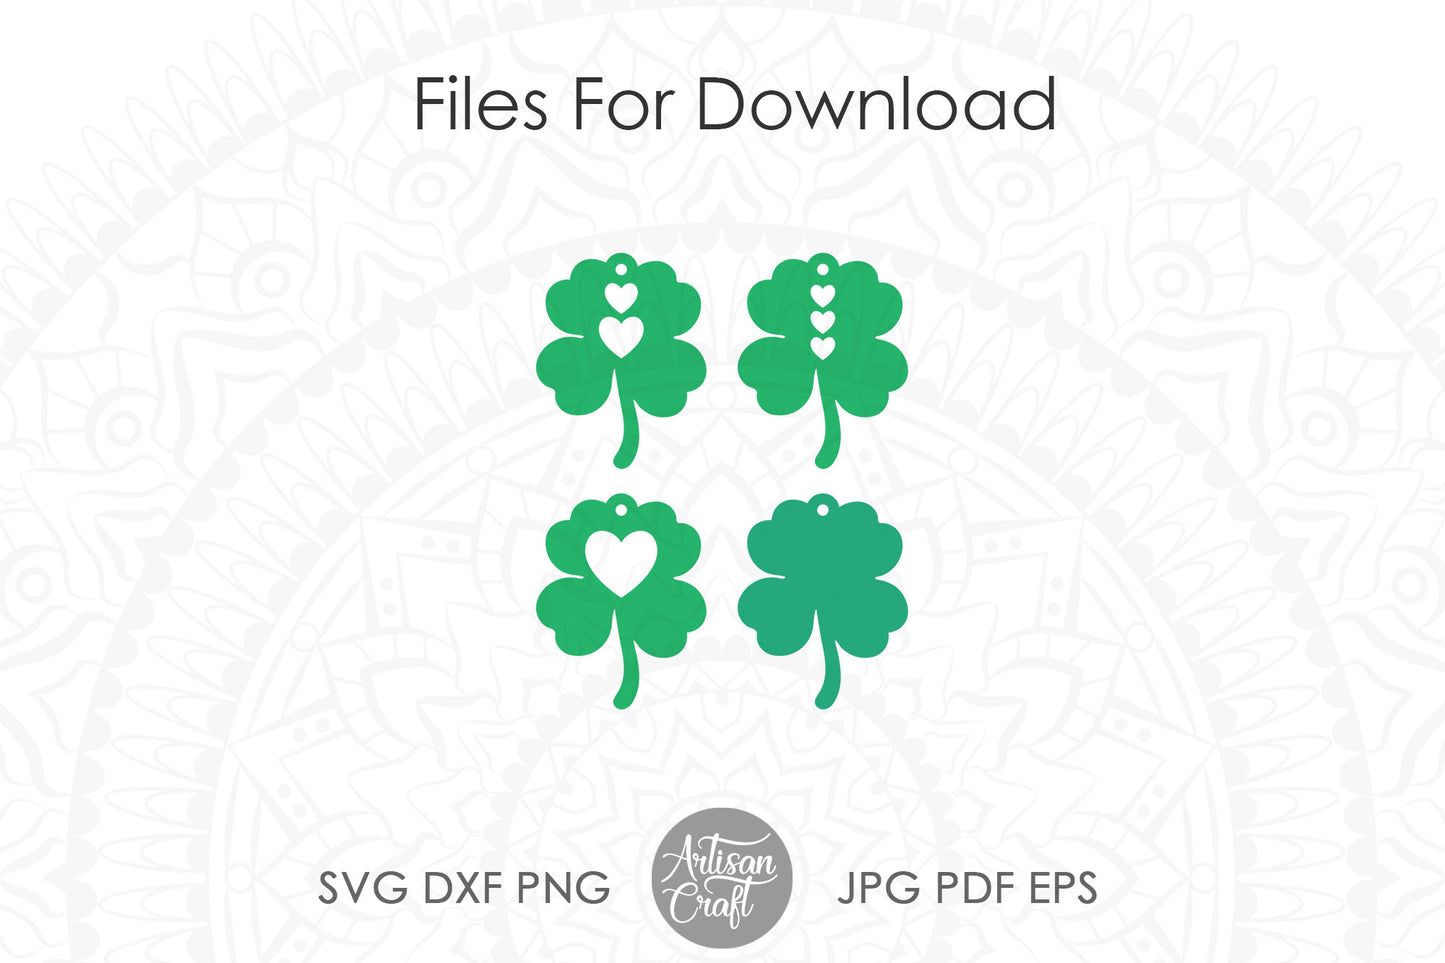 Four Leaf Clover Earrings SVG for St Patrick's Day